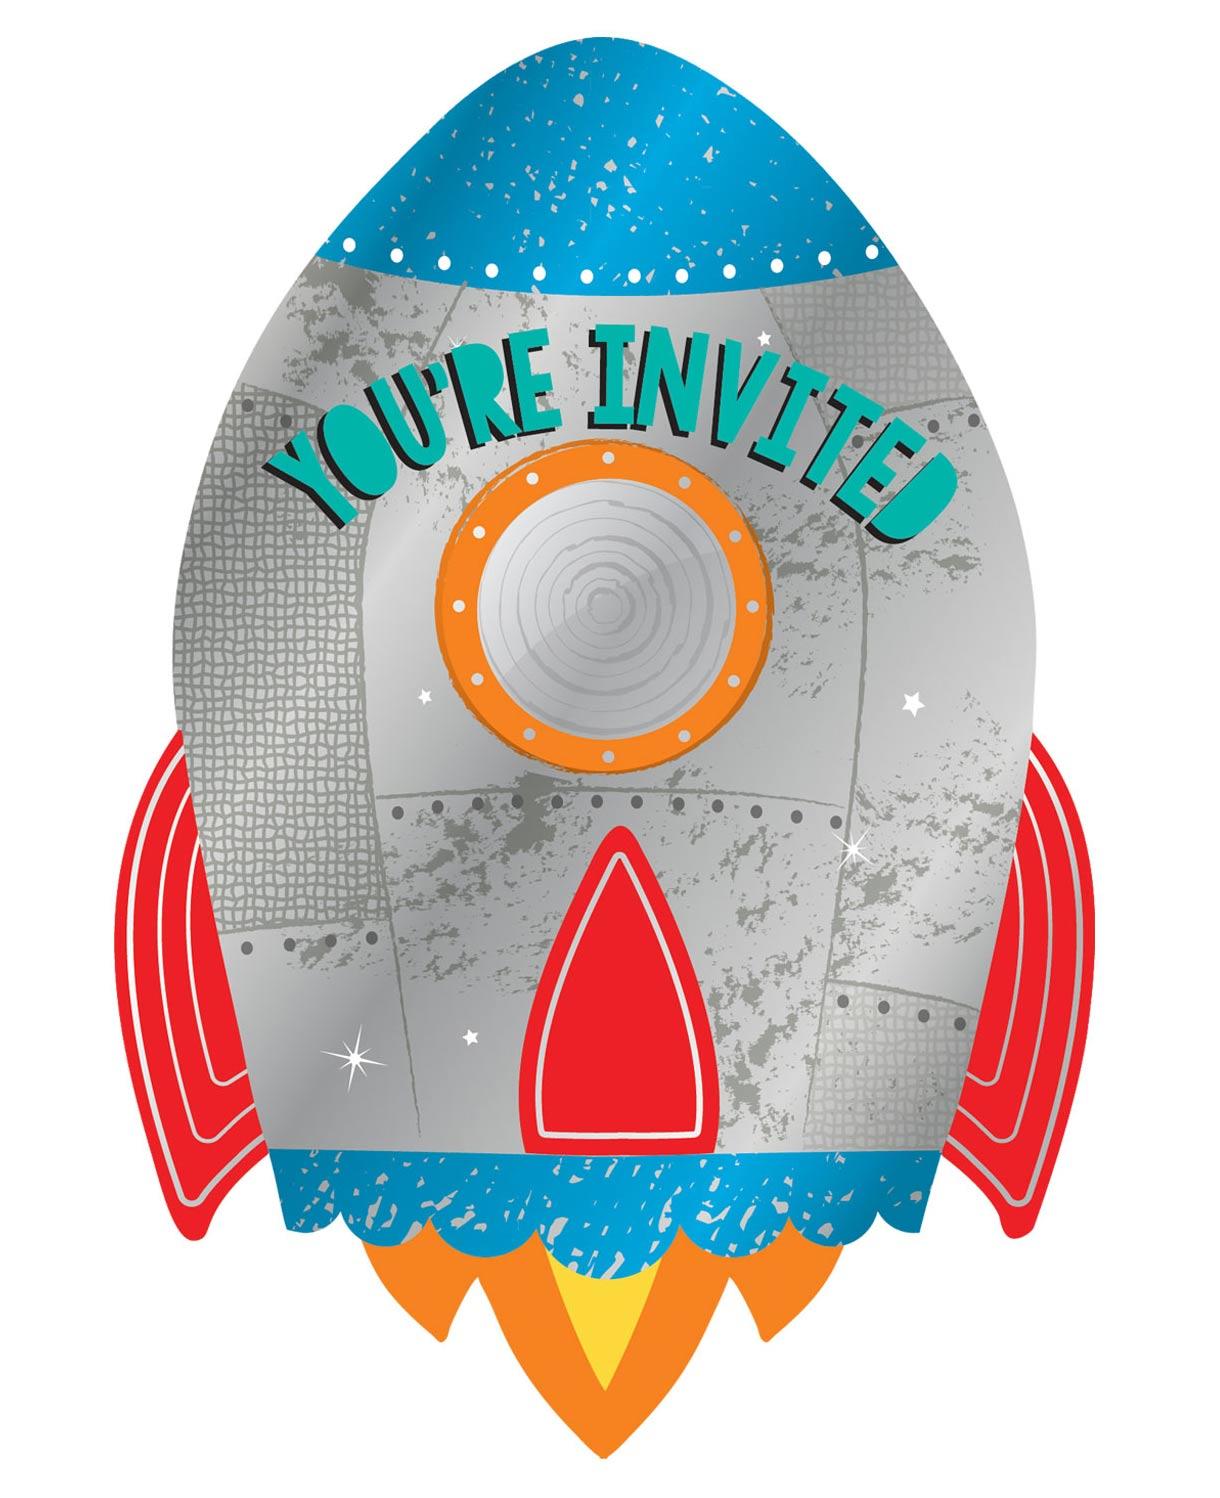 Blast Off Birthday Postcard Invitations with Stickers Pk 8 by Amscan 492278 available here at Karnival Costumes online party shop